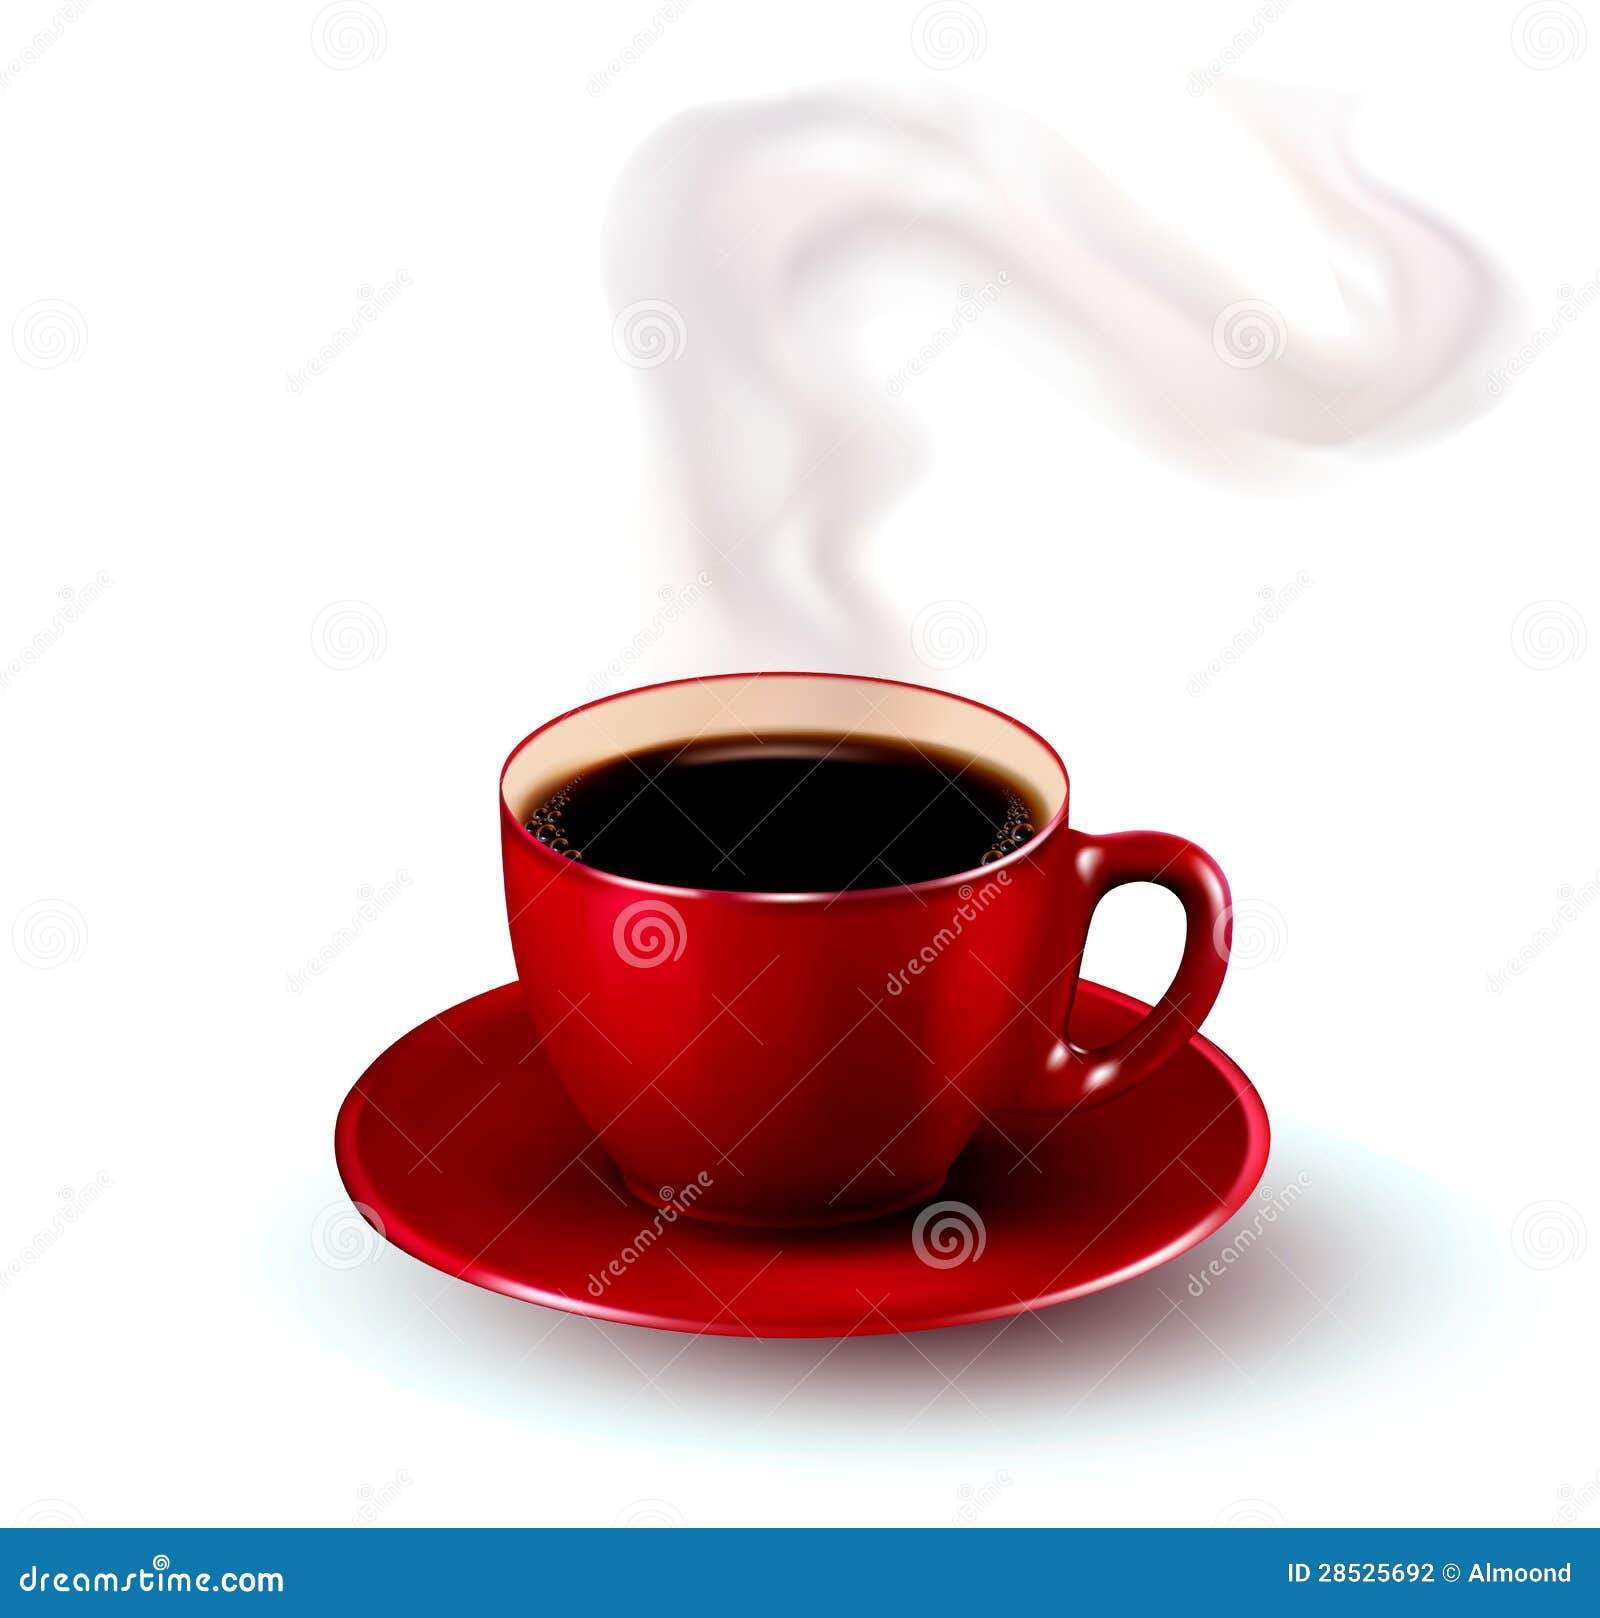 perfect red cup of coffee with steam.